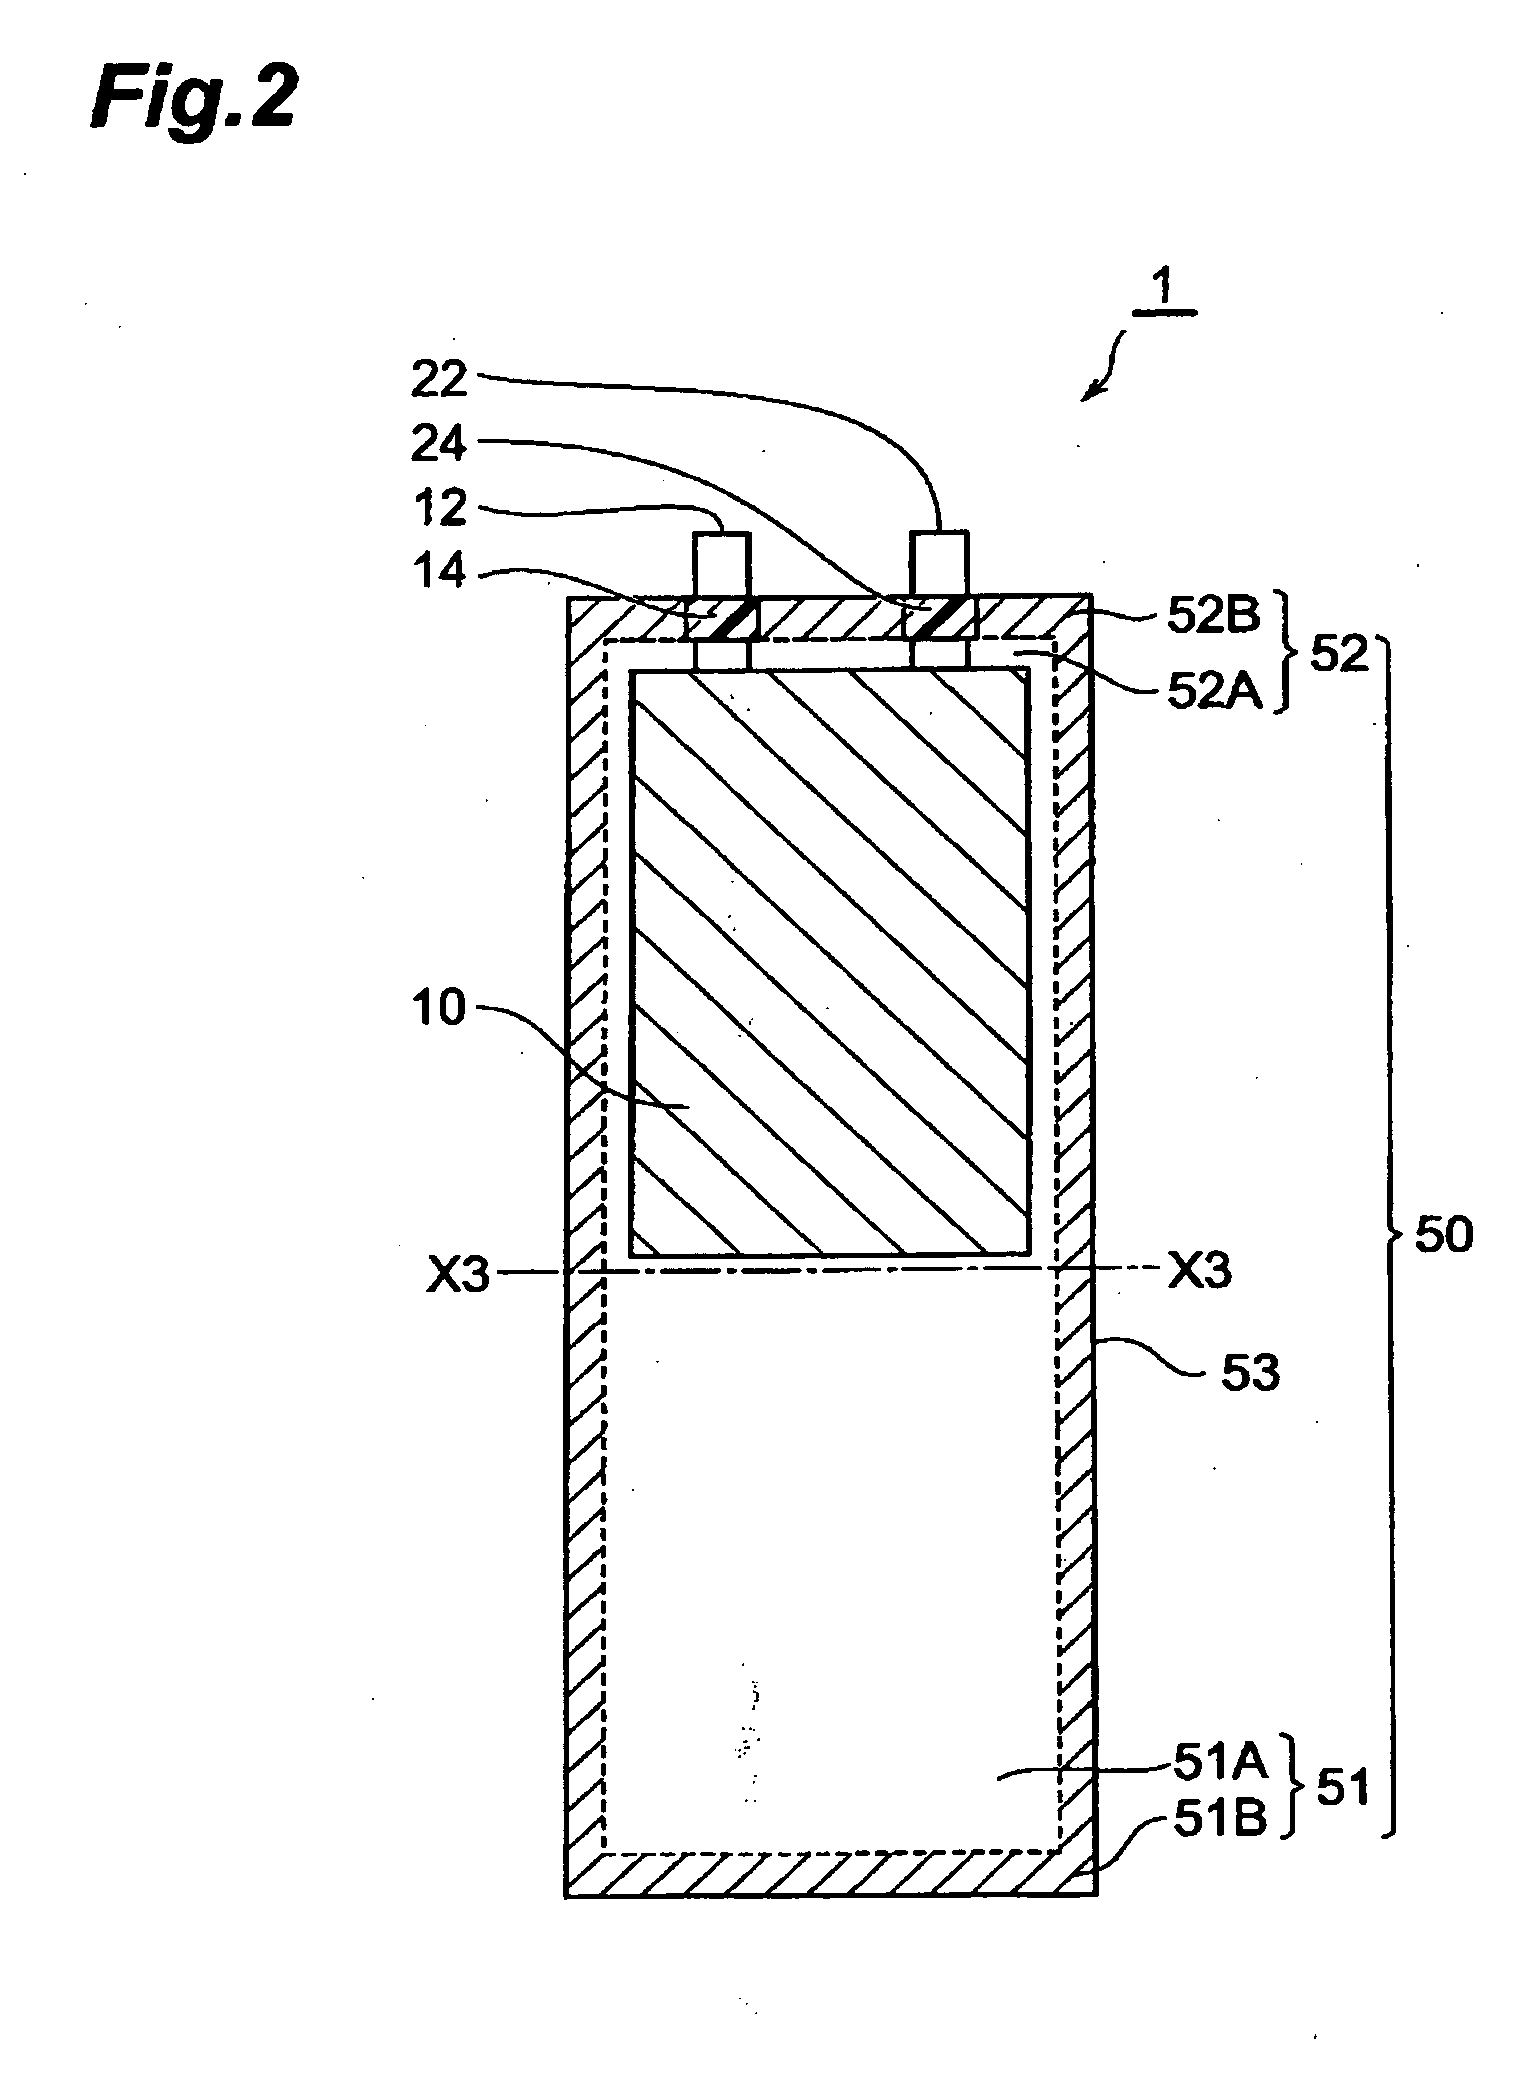 Method of making composite particle for electrode, method of making electrode, method of making electrochemical device, apparatus for making composite particle for electrode, apparatus for making electrode, and apparatus for making electrochemical device